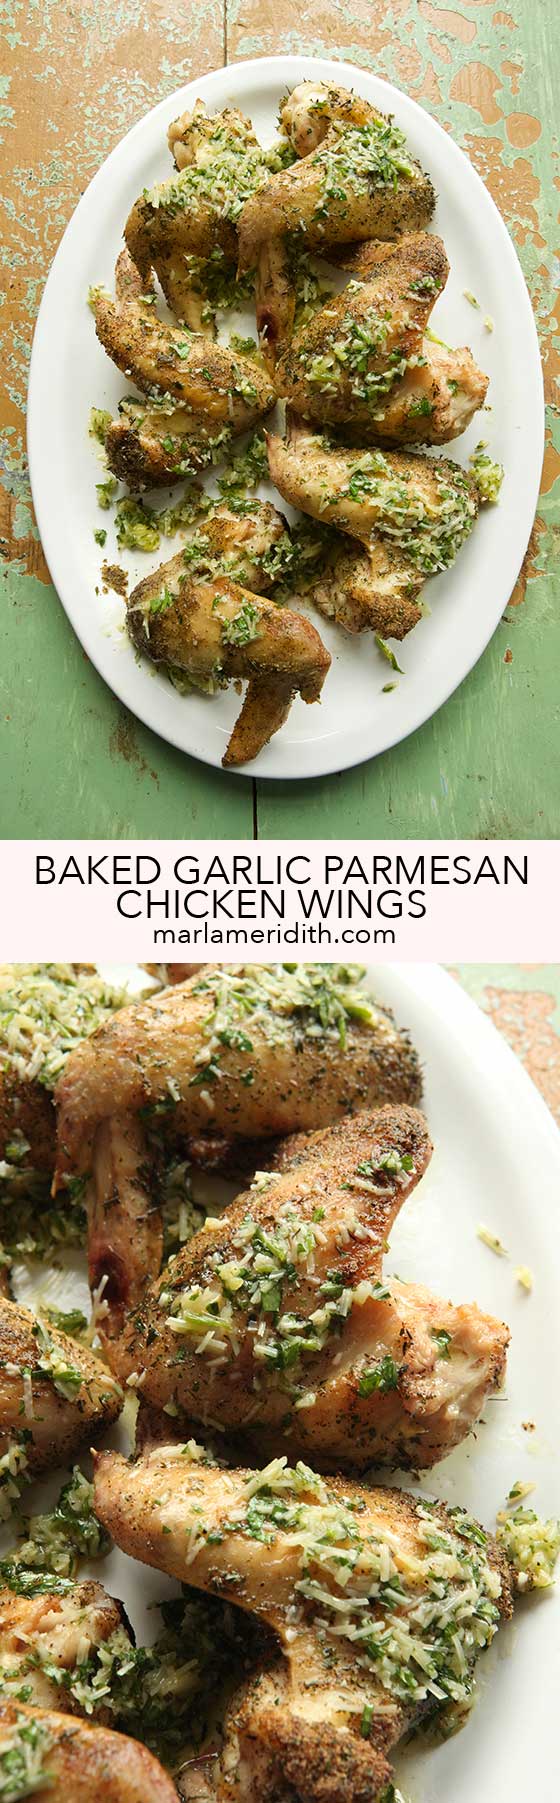 Around here we can't get enough chicken wings and this recipe for Baked Garlic Parmesan Chicken Wings is among our favorites! Serve as part of your weeknight dinner or for any kind of entertaining. Great for game day! MarlaMeridith.com